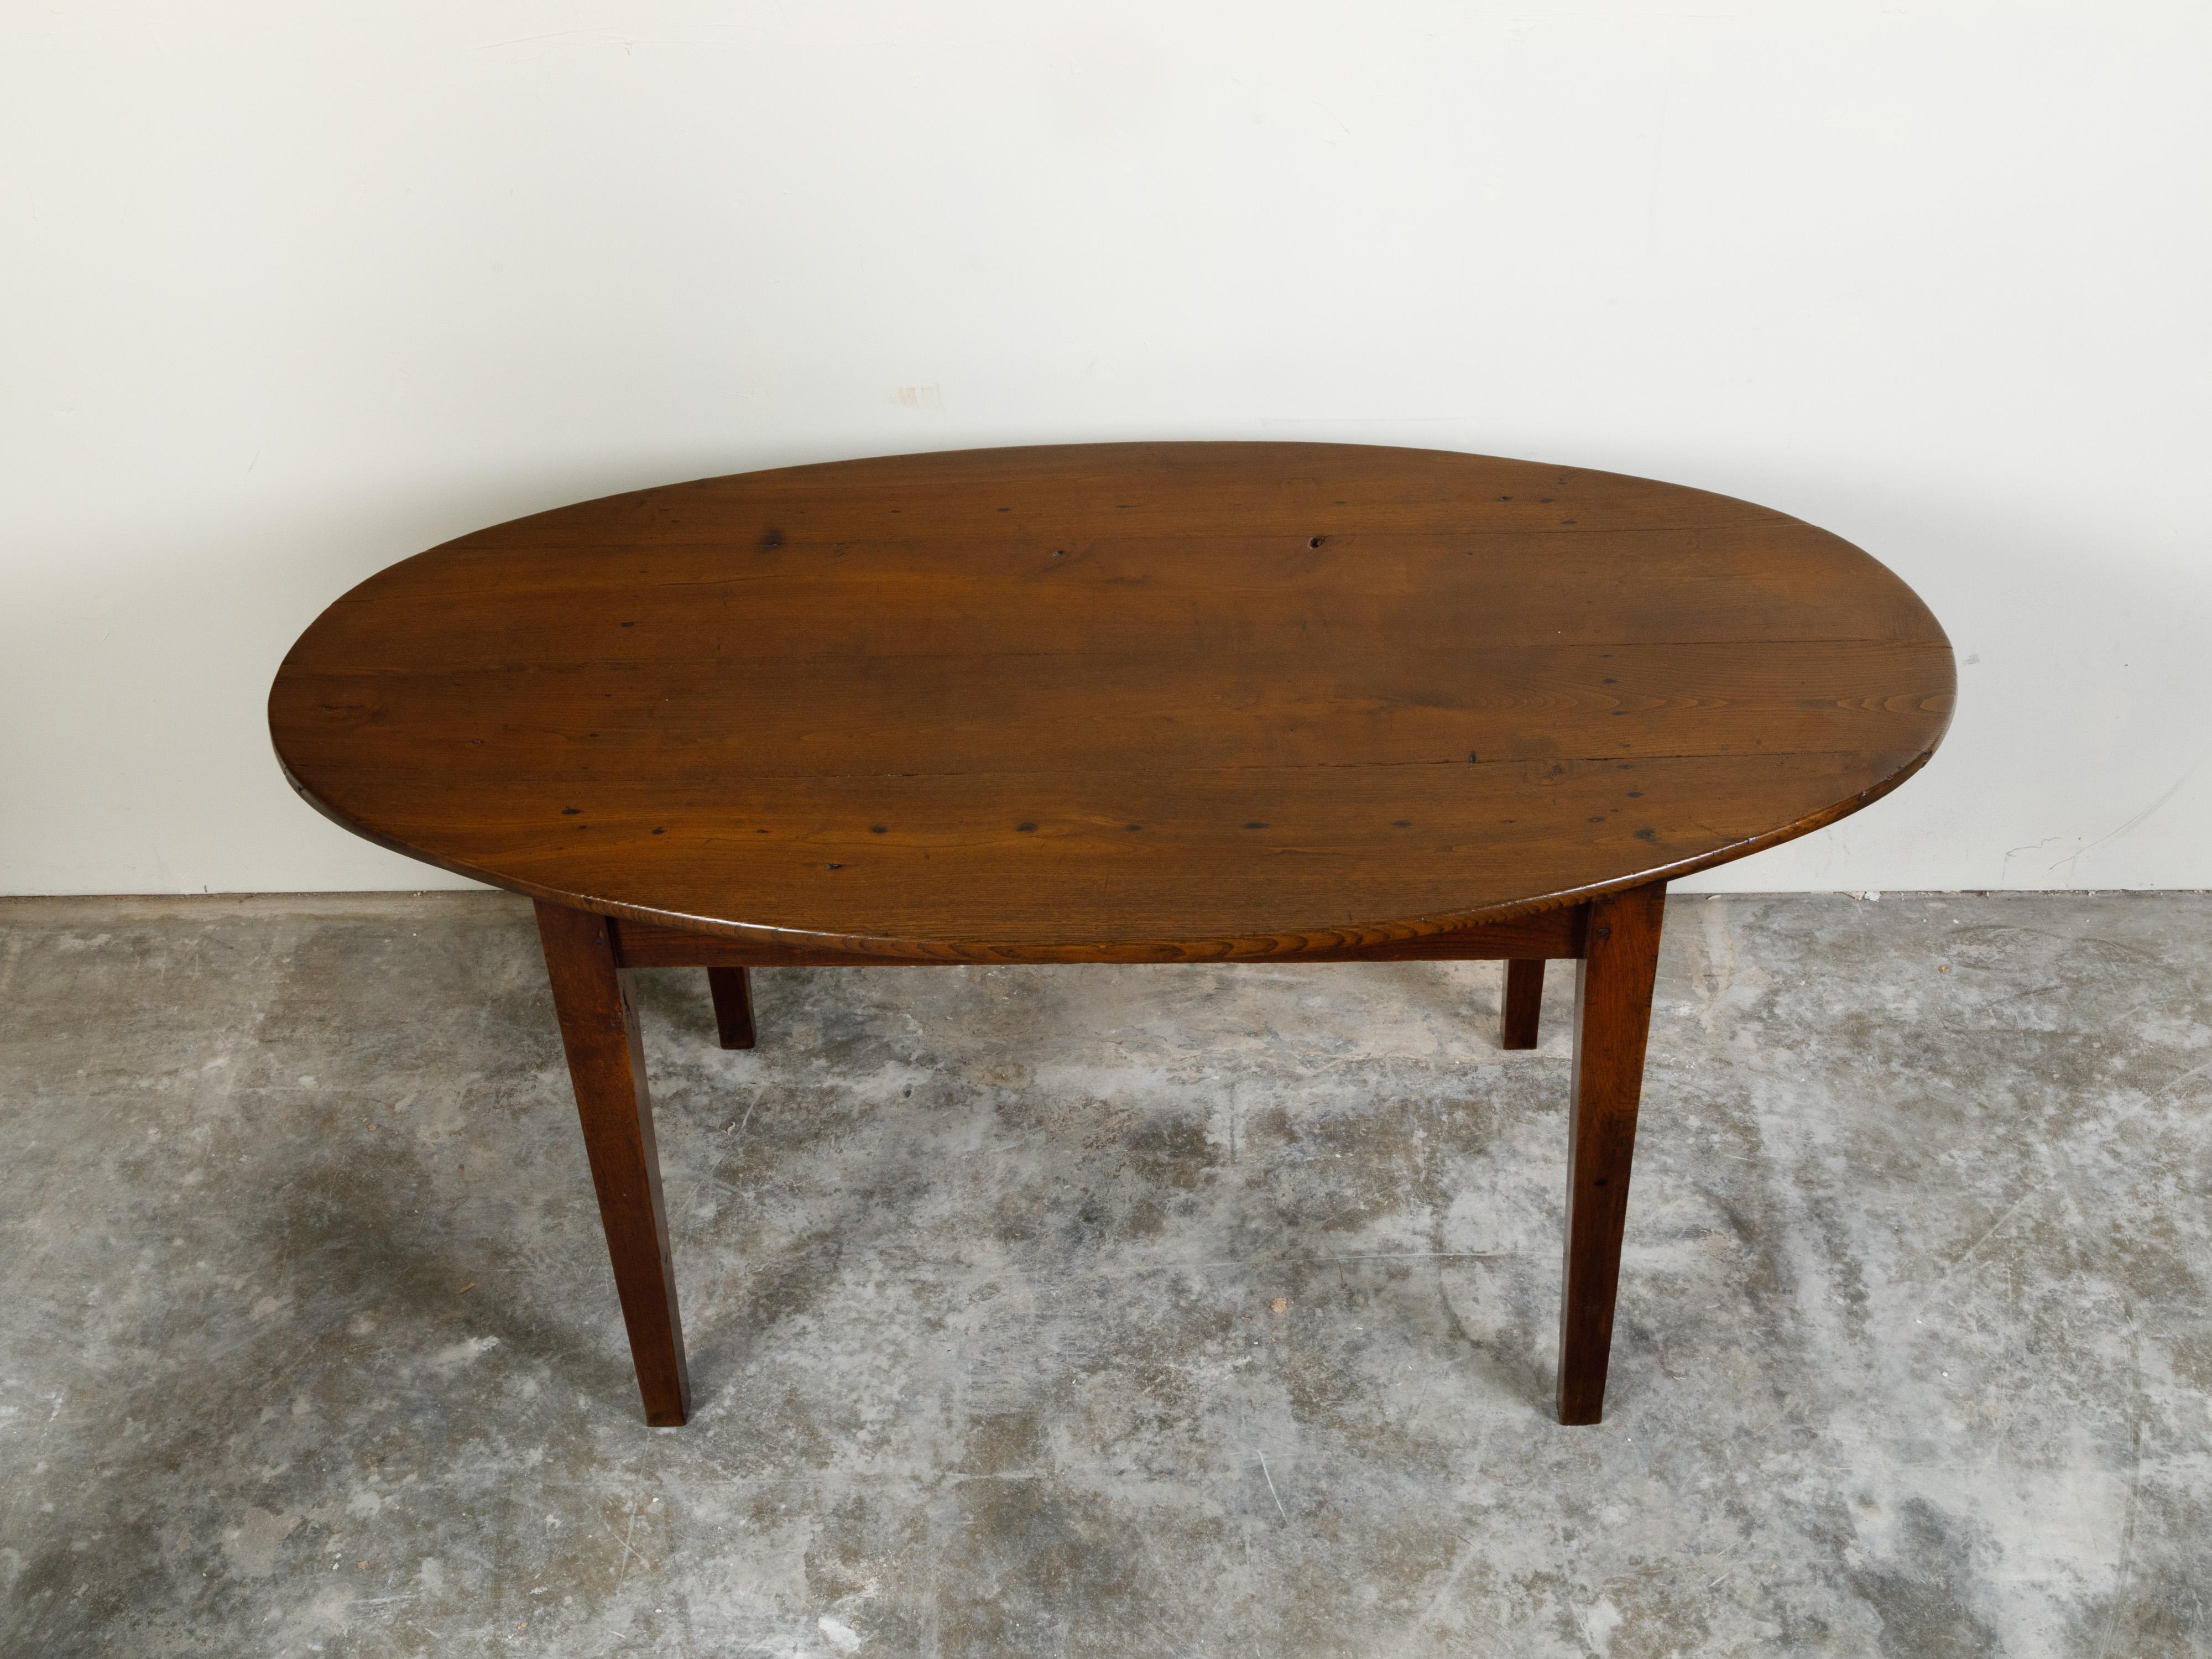 English 19th Century Walnut Table with Oval Top, Tapered Legs and Dark Patina In Good Condition For Sale In Atlanta, GA